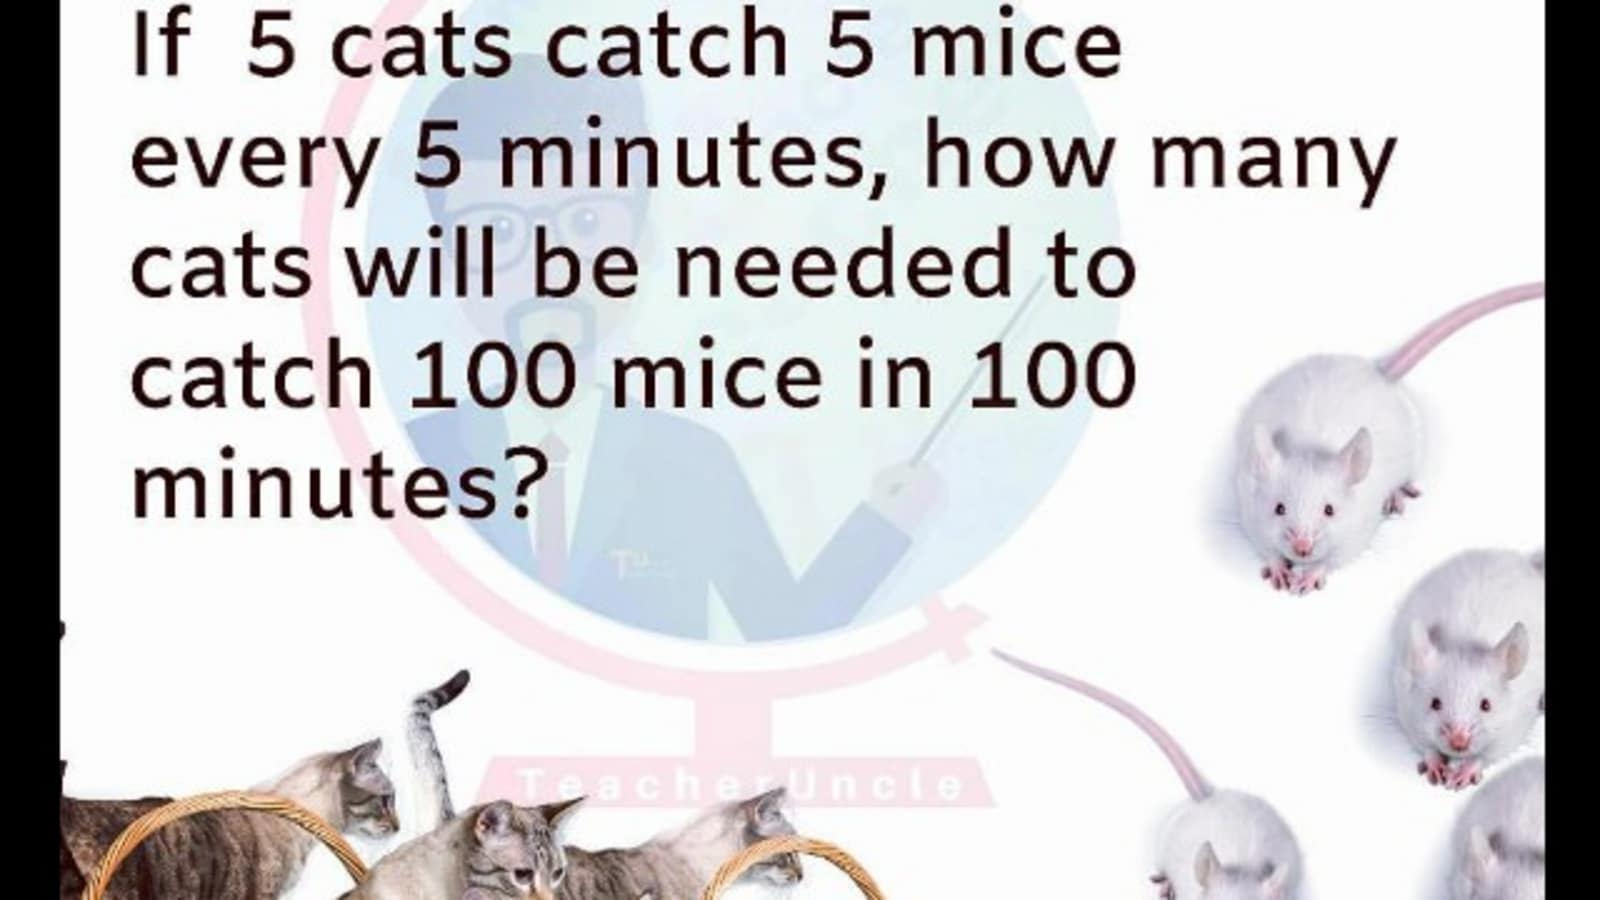 Are you smart enough to solve this cat-mouse brain teaser?